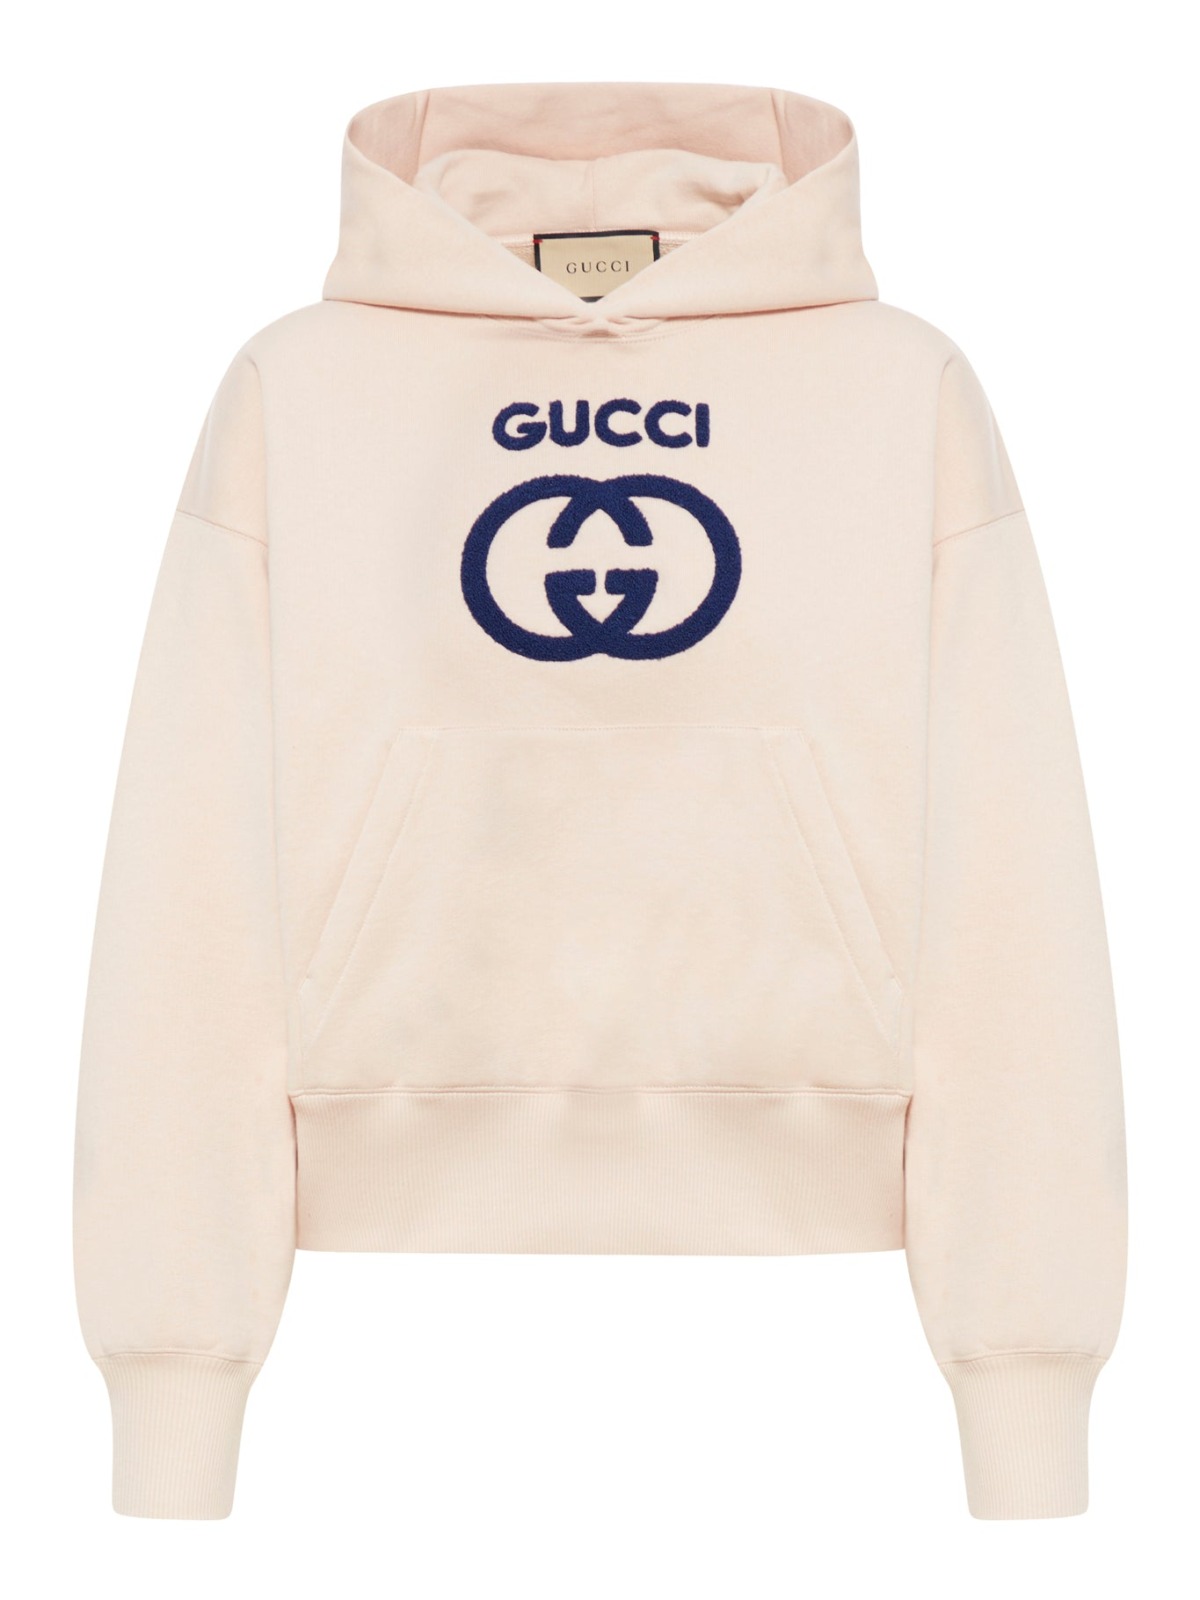 Suitnegozi Womens Sweatshirt in Pink by Gucci GOOFASH